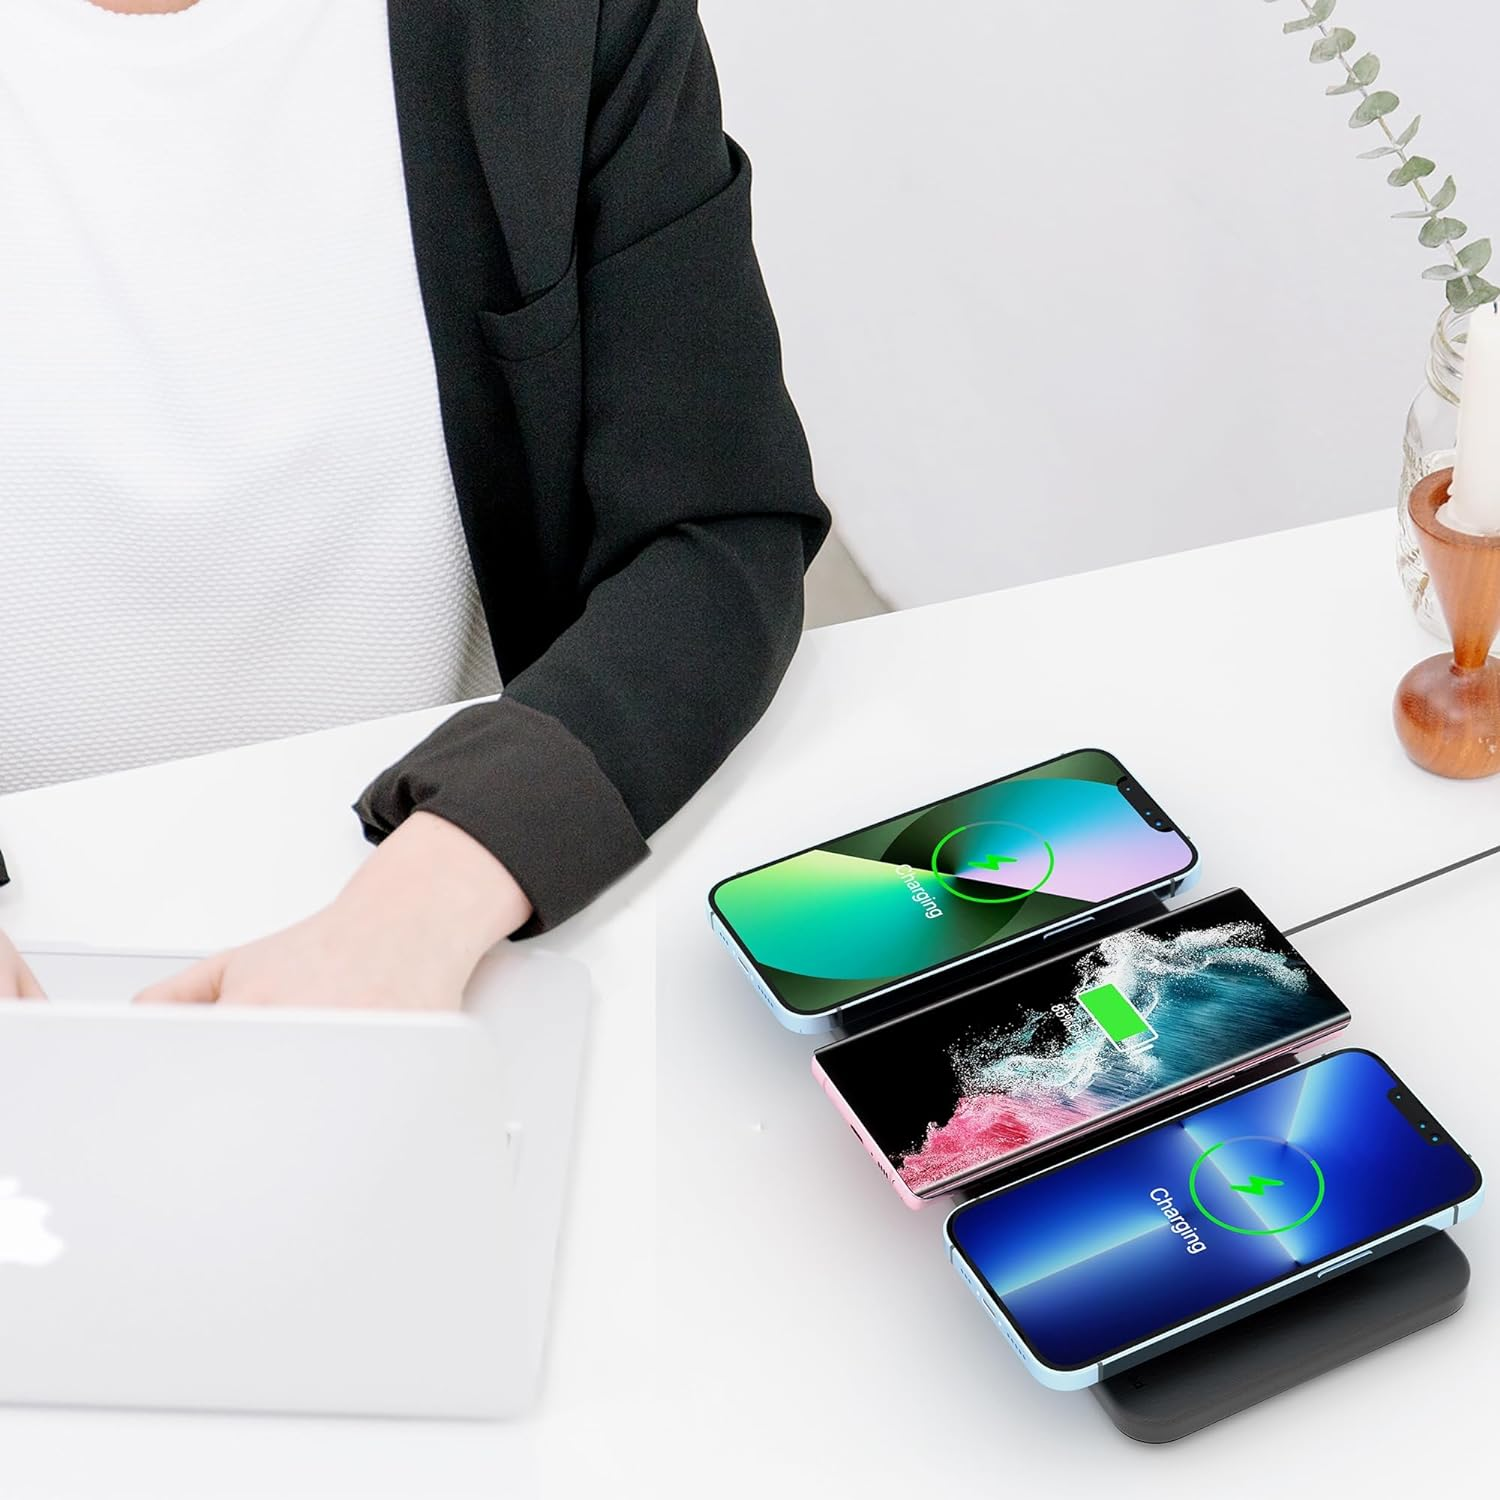 JE Make IT Simple Triple Wireless Charger Pad : Best Charging Pads for Multi-Device